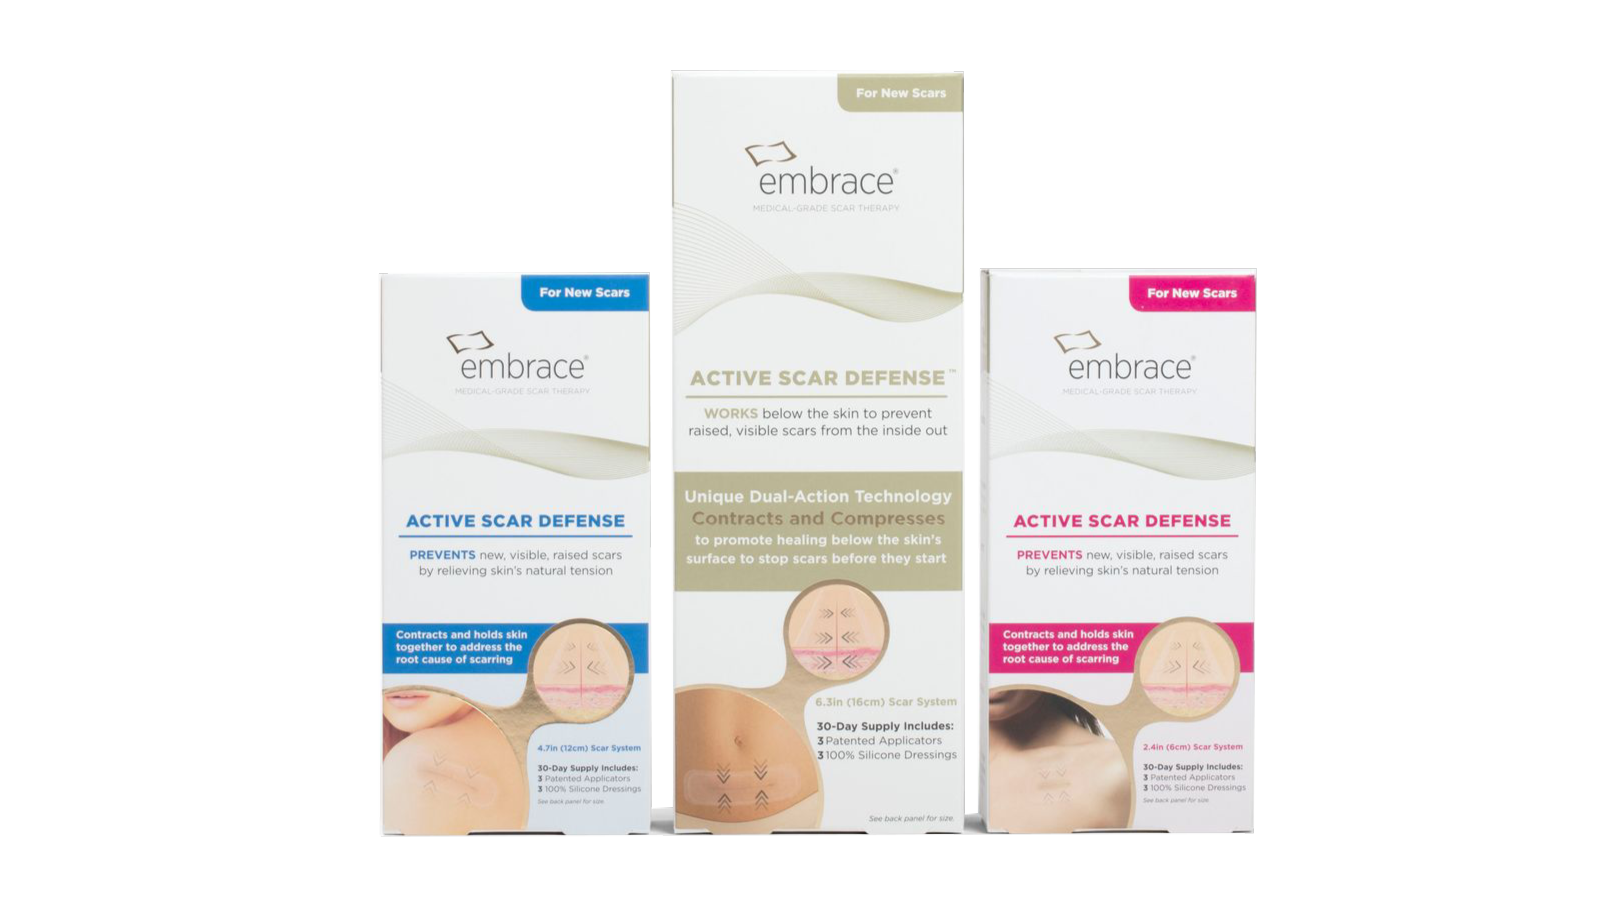 For NEW scars   |   embrace Active Scar Defense